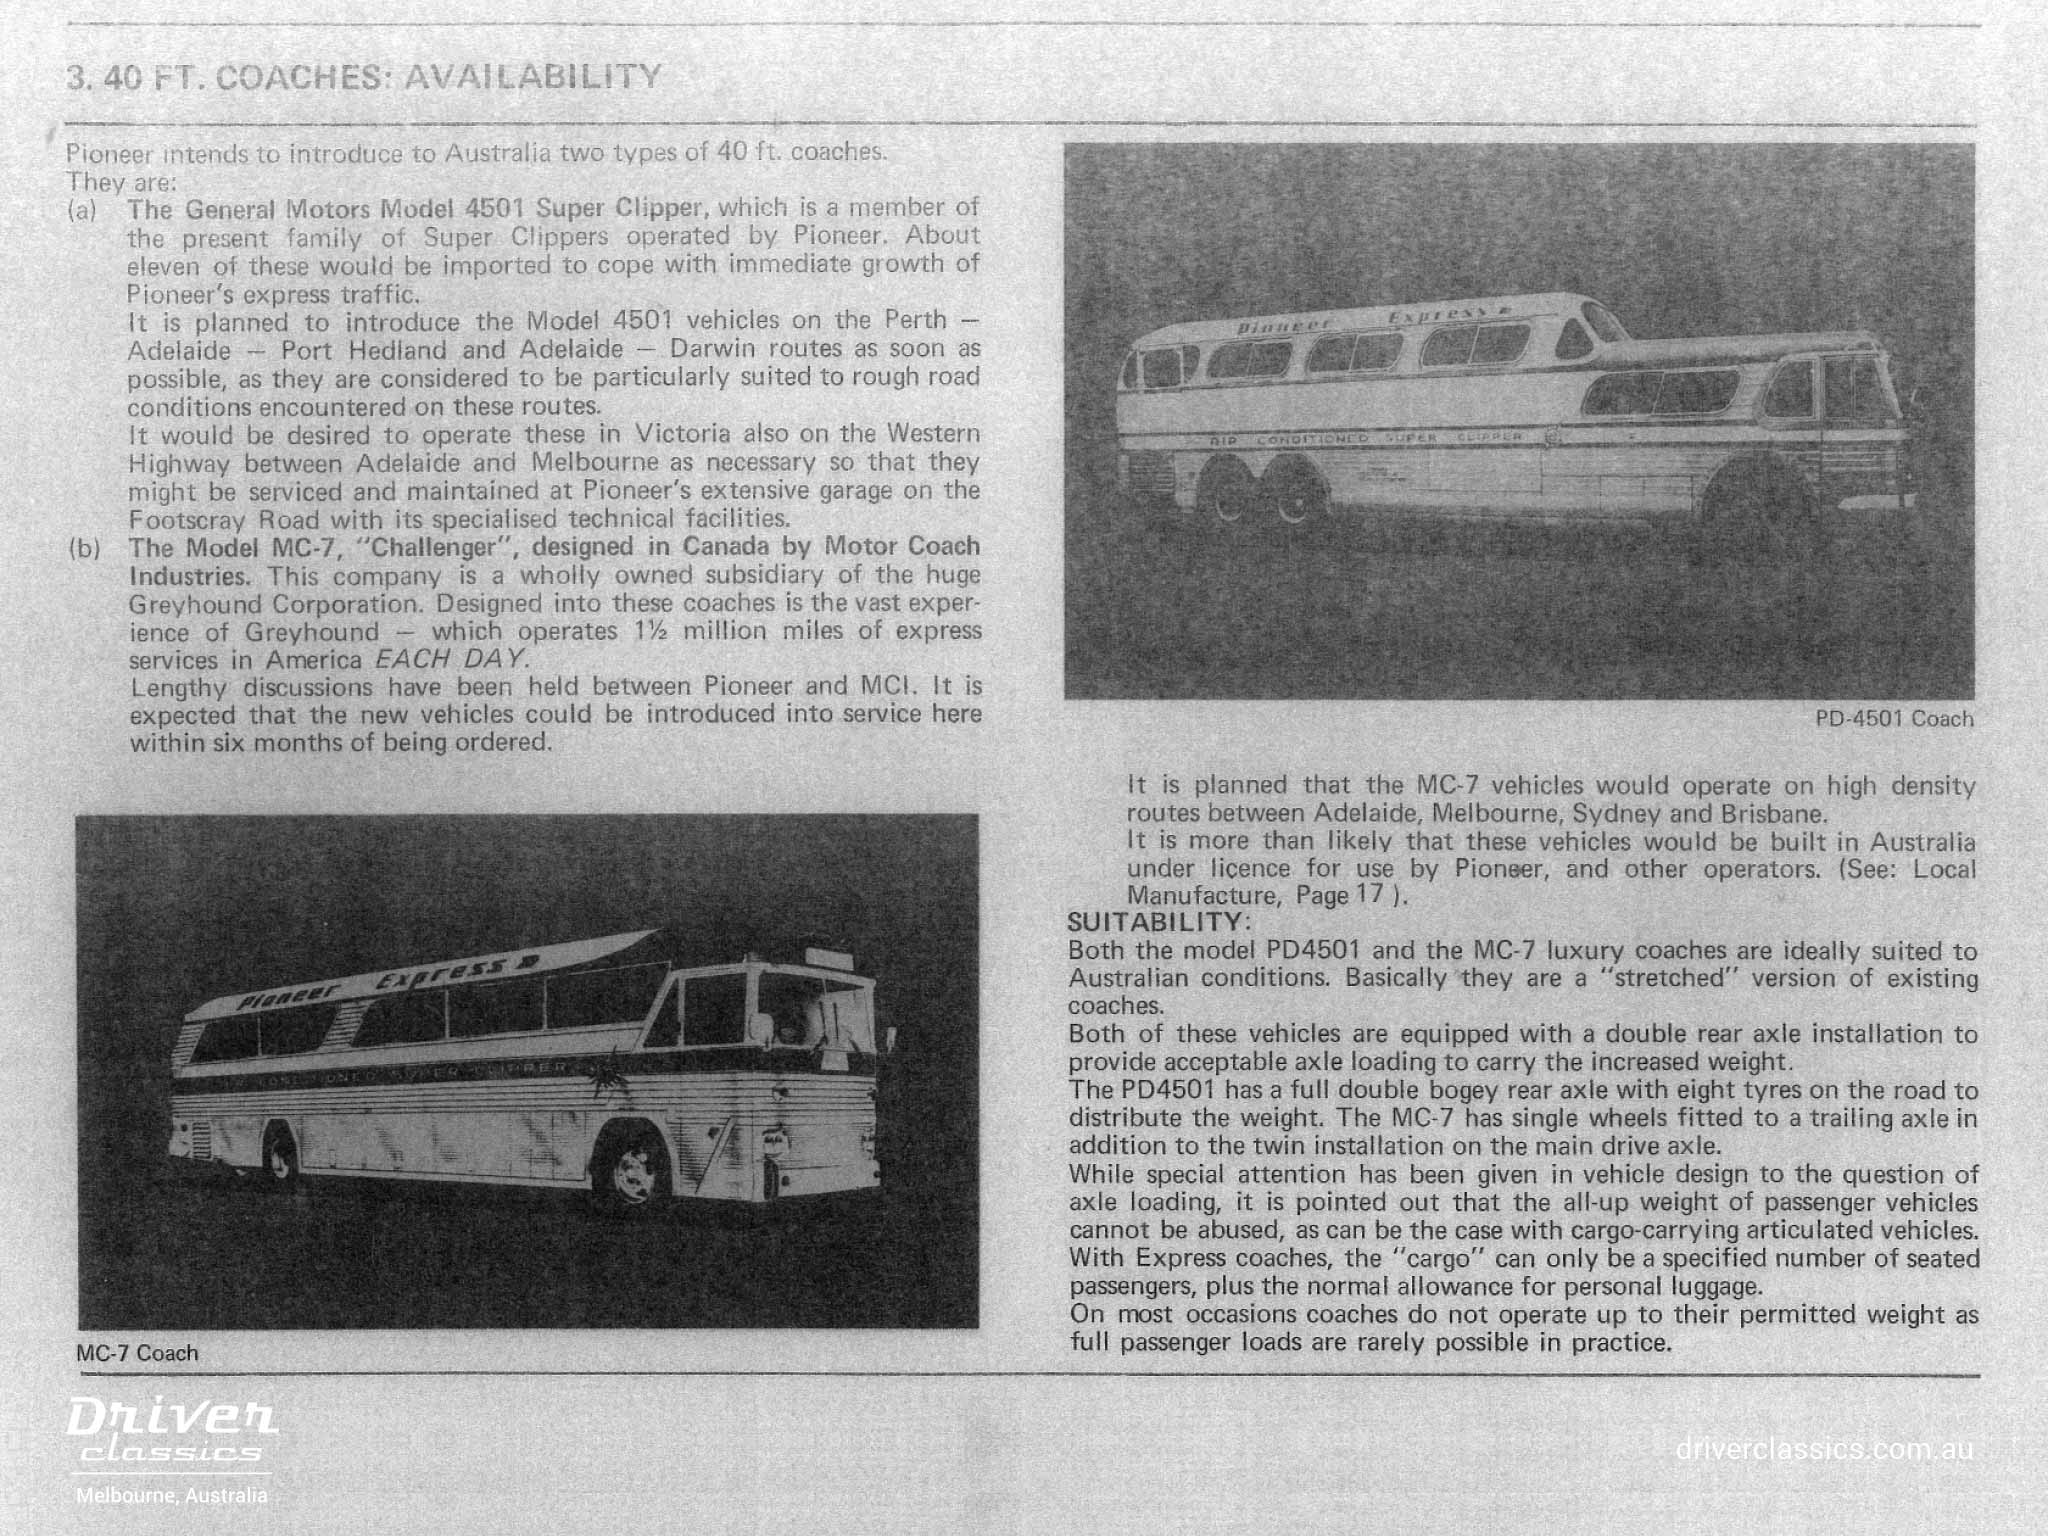 Case for the operation of 40ft long coaches in Australia